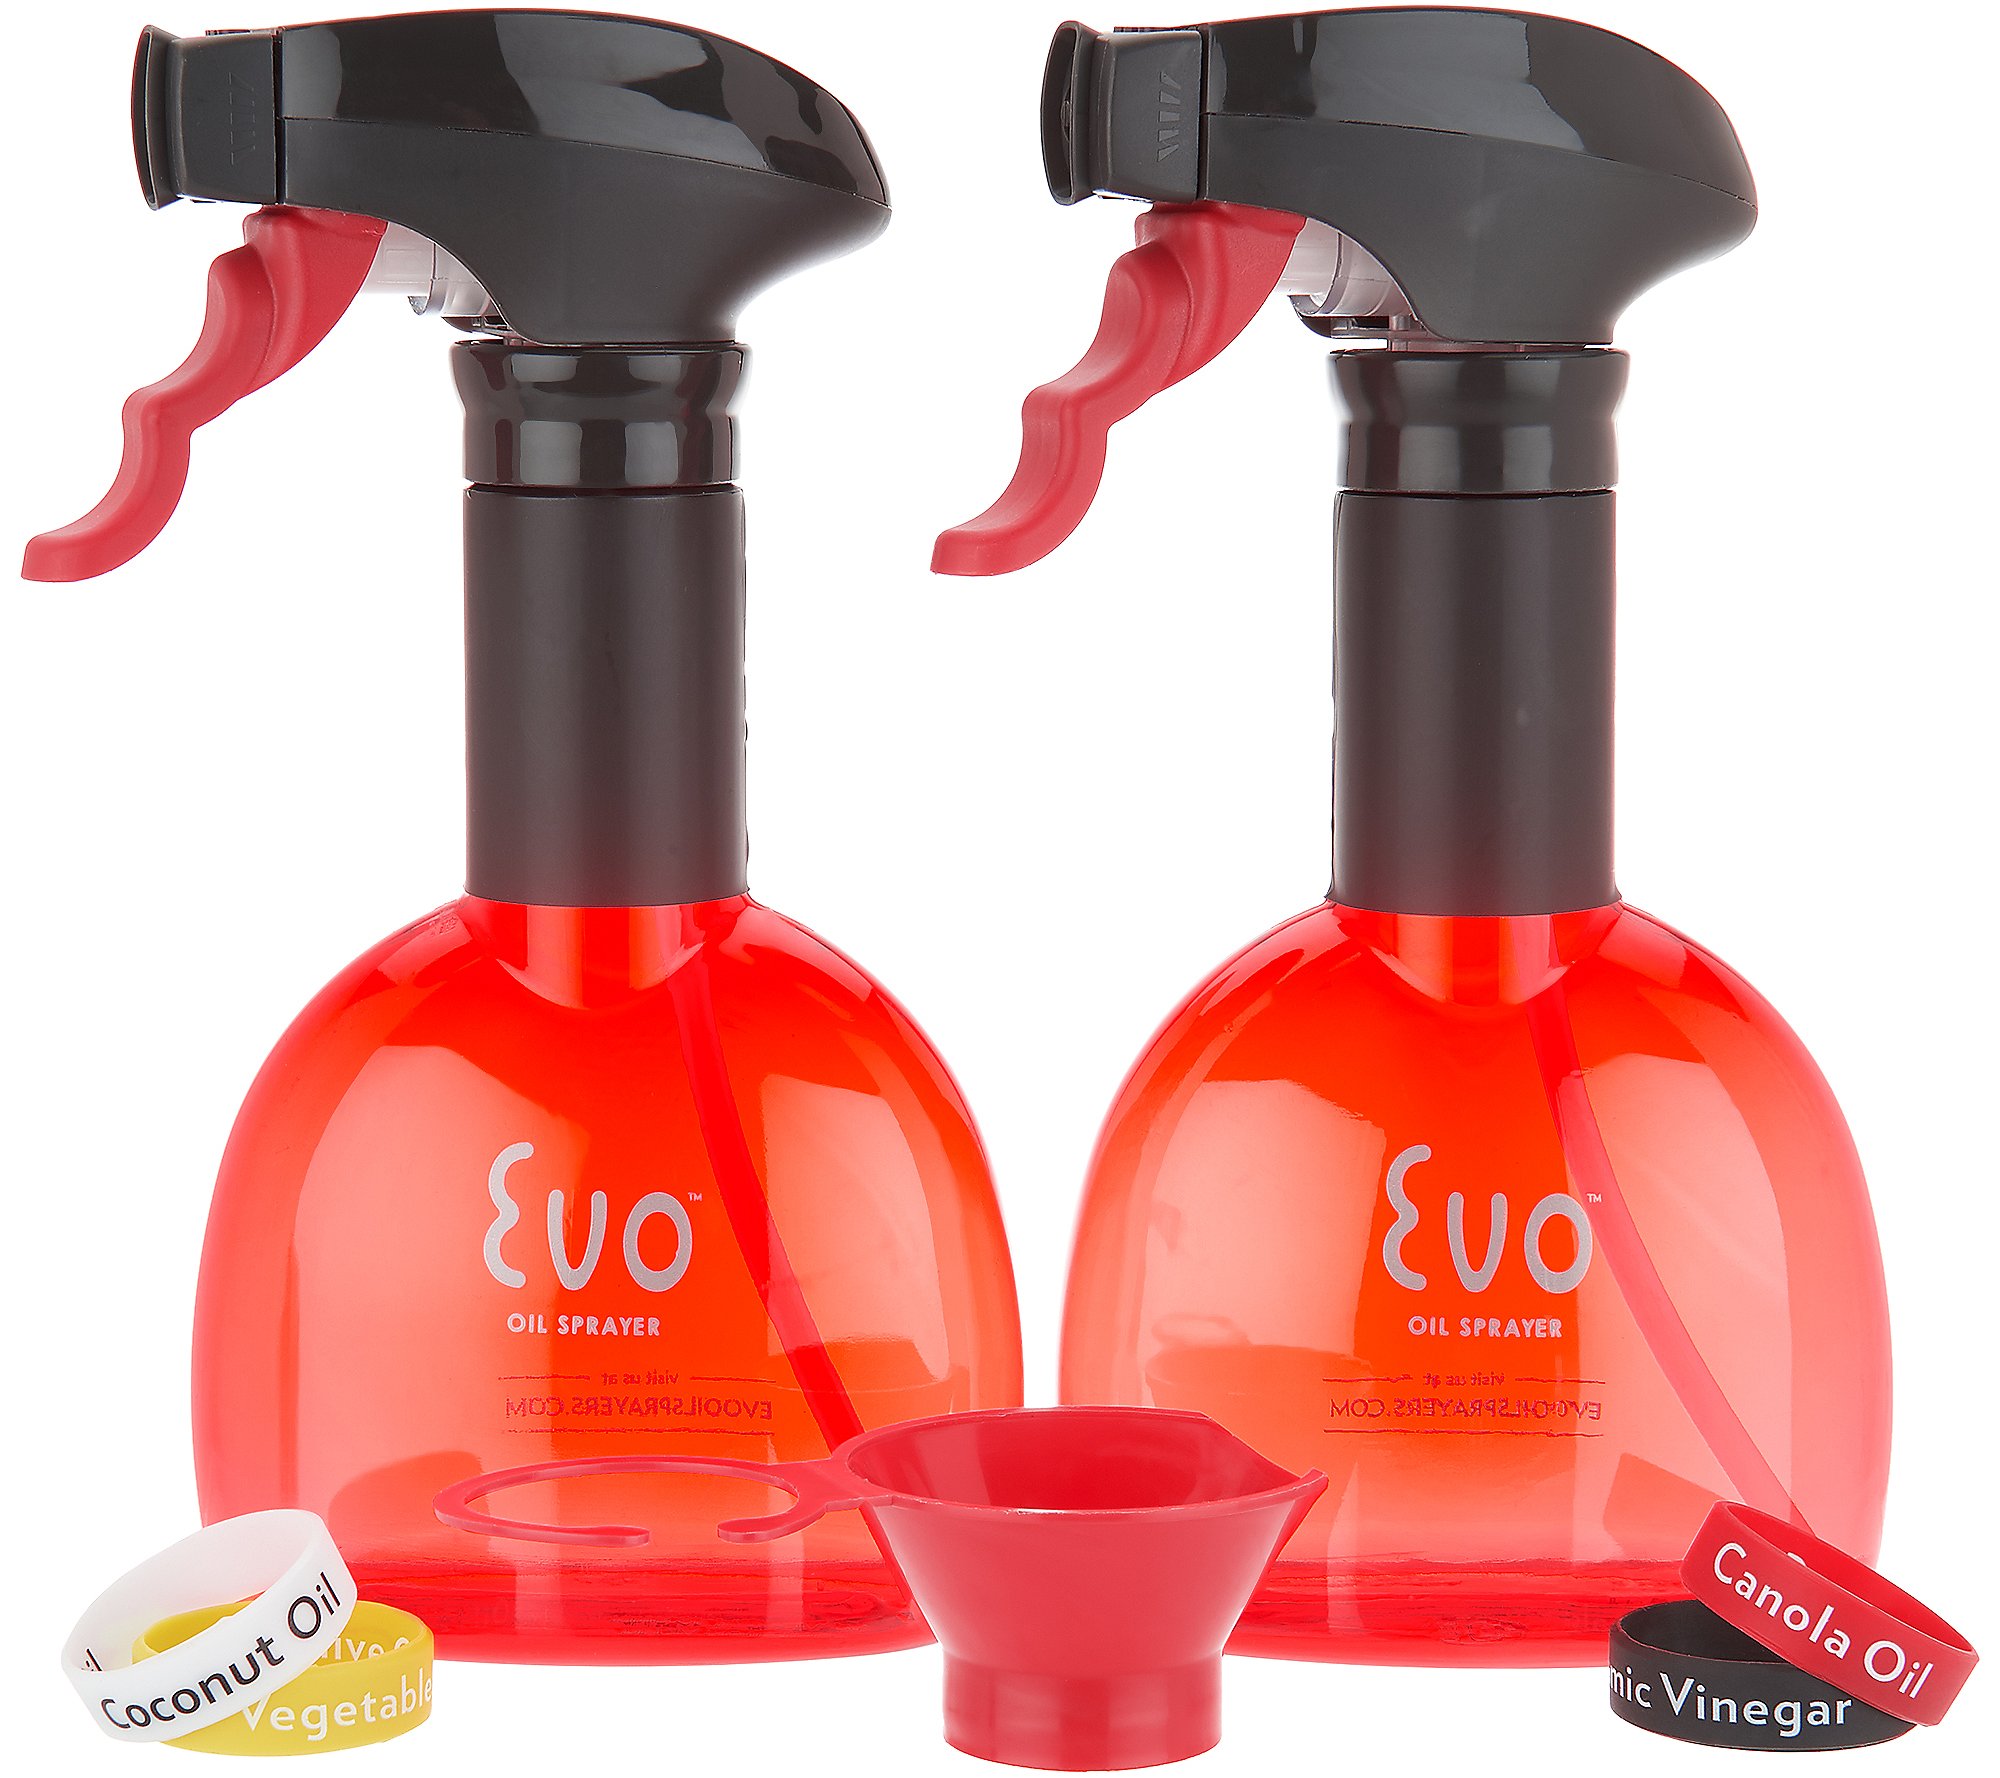 8 OZ.NON AEROSOL OIL TRIGGER SPRAYERS IN GIFT BOXES 3 Details about   EVO SET OF